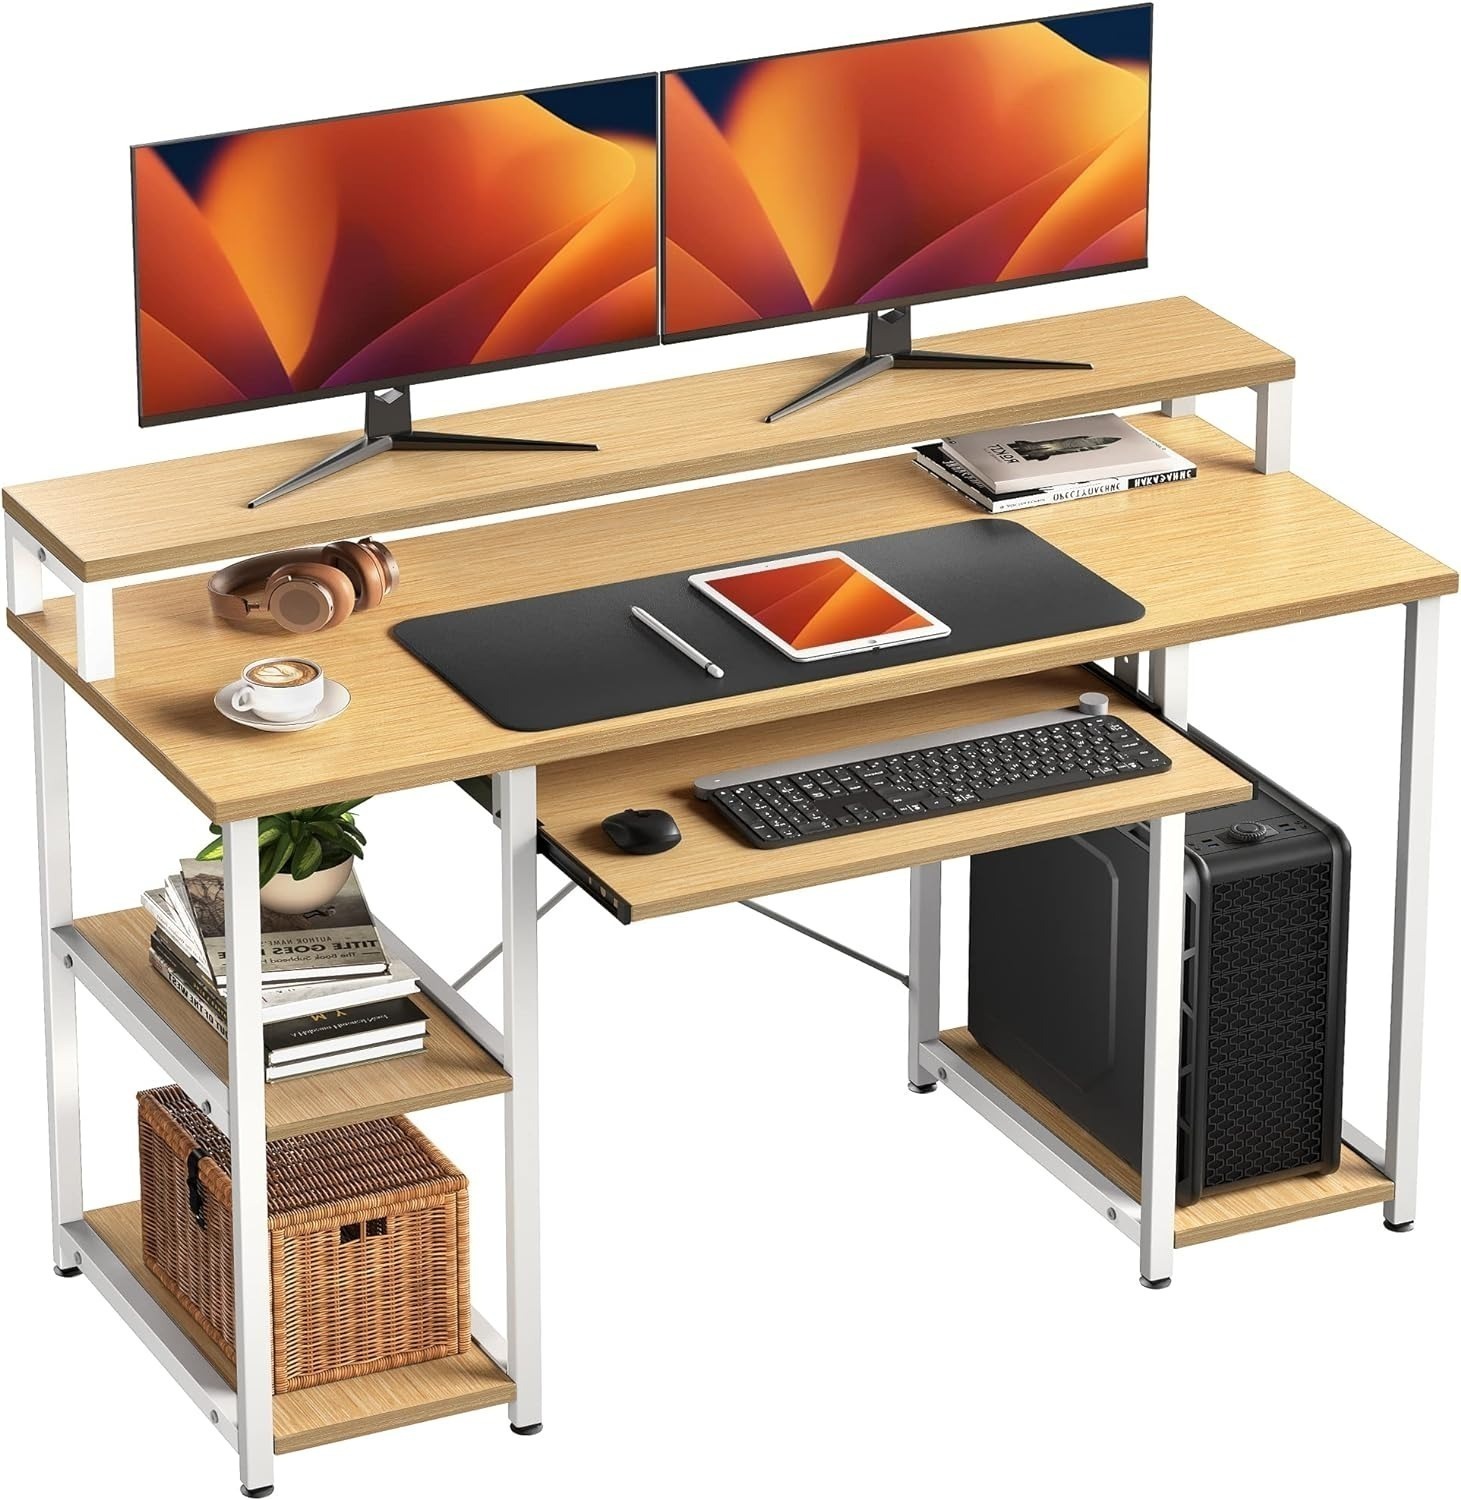 47" NOBLEWELL Computer Desk with Storage Shelves & Keyboard Tray (Various Colors) from $69 + Free Shipping